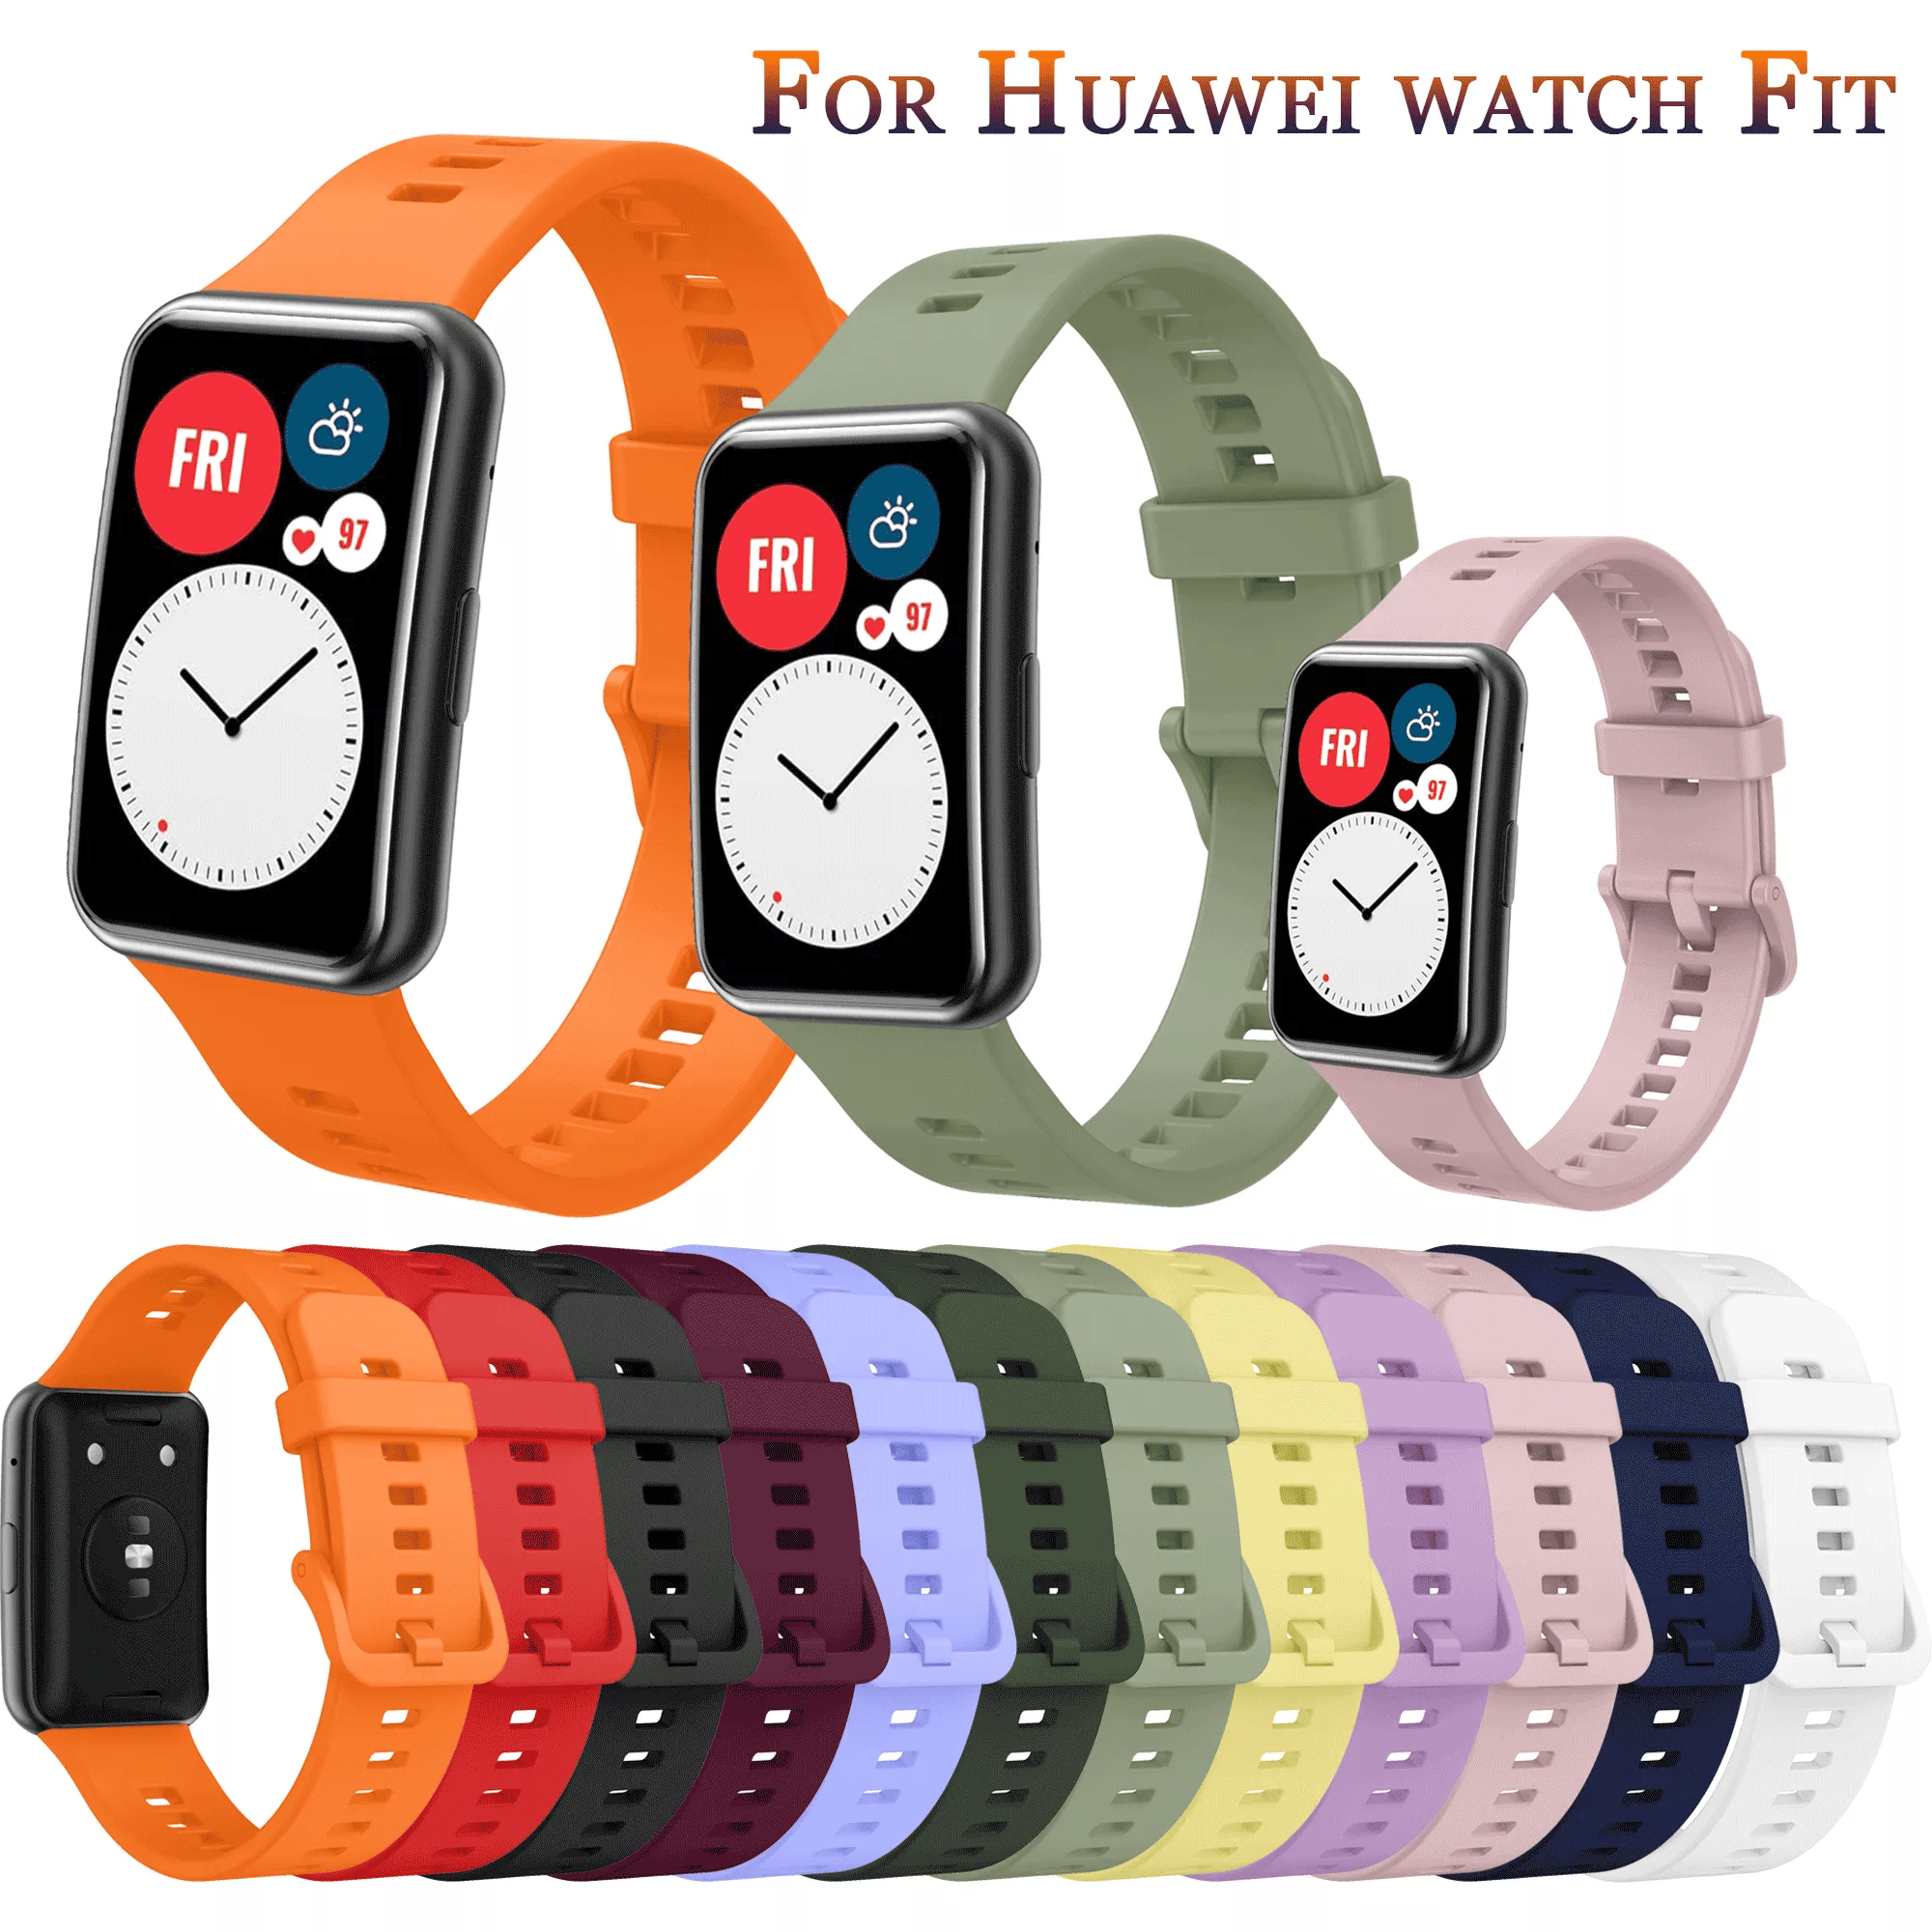 Silicone Band For Huawei Watch FIT Strap Smartwatch Accessories Replacement Wrist bracelet correa huawei watch fit 2021 Strap